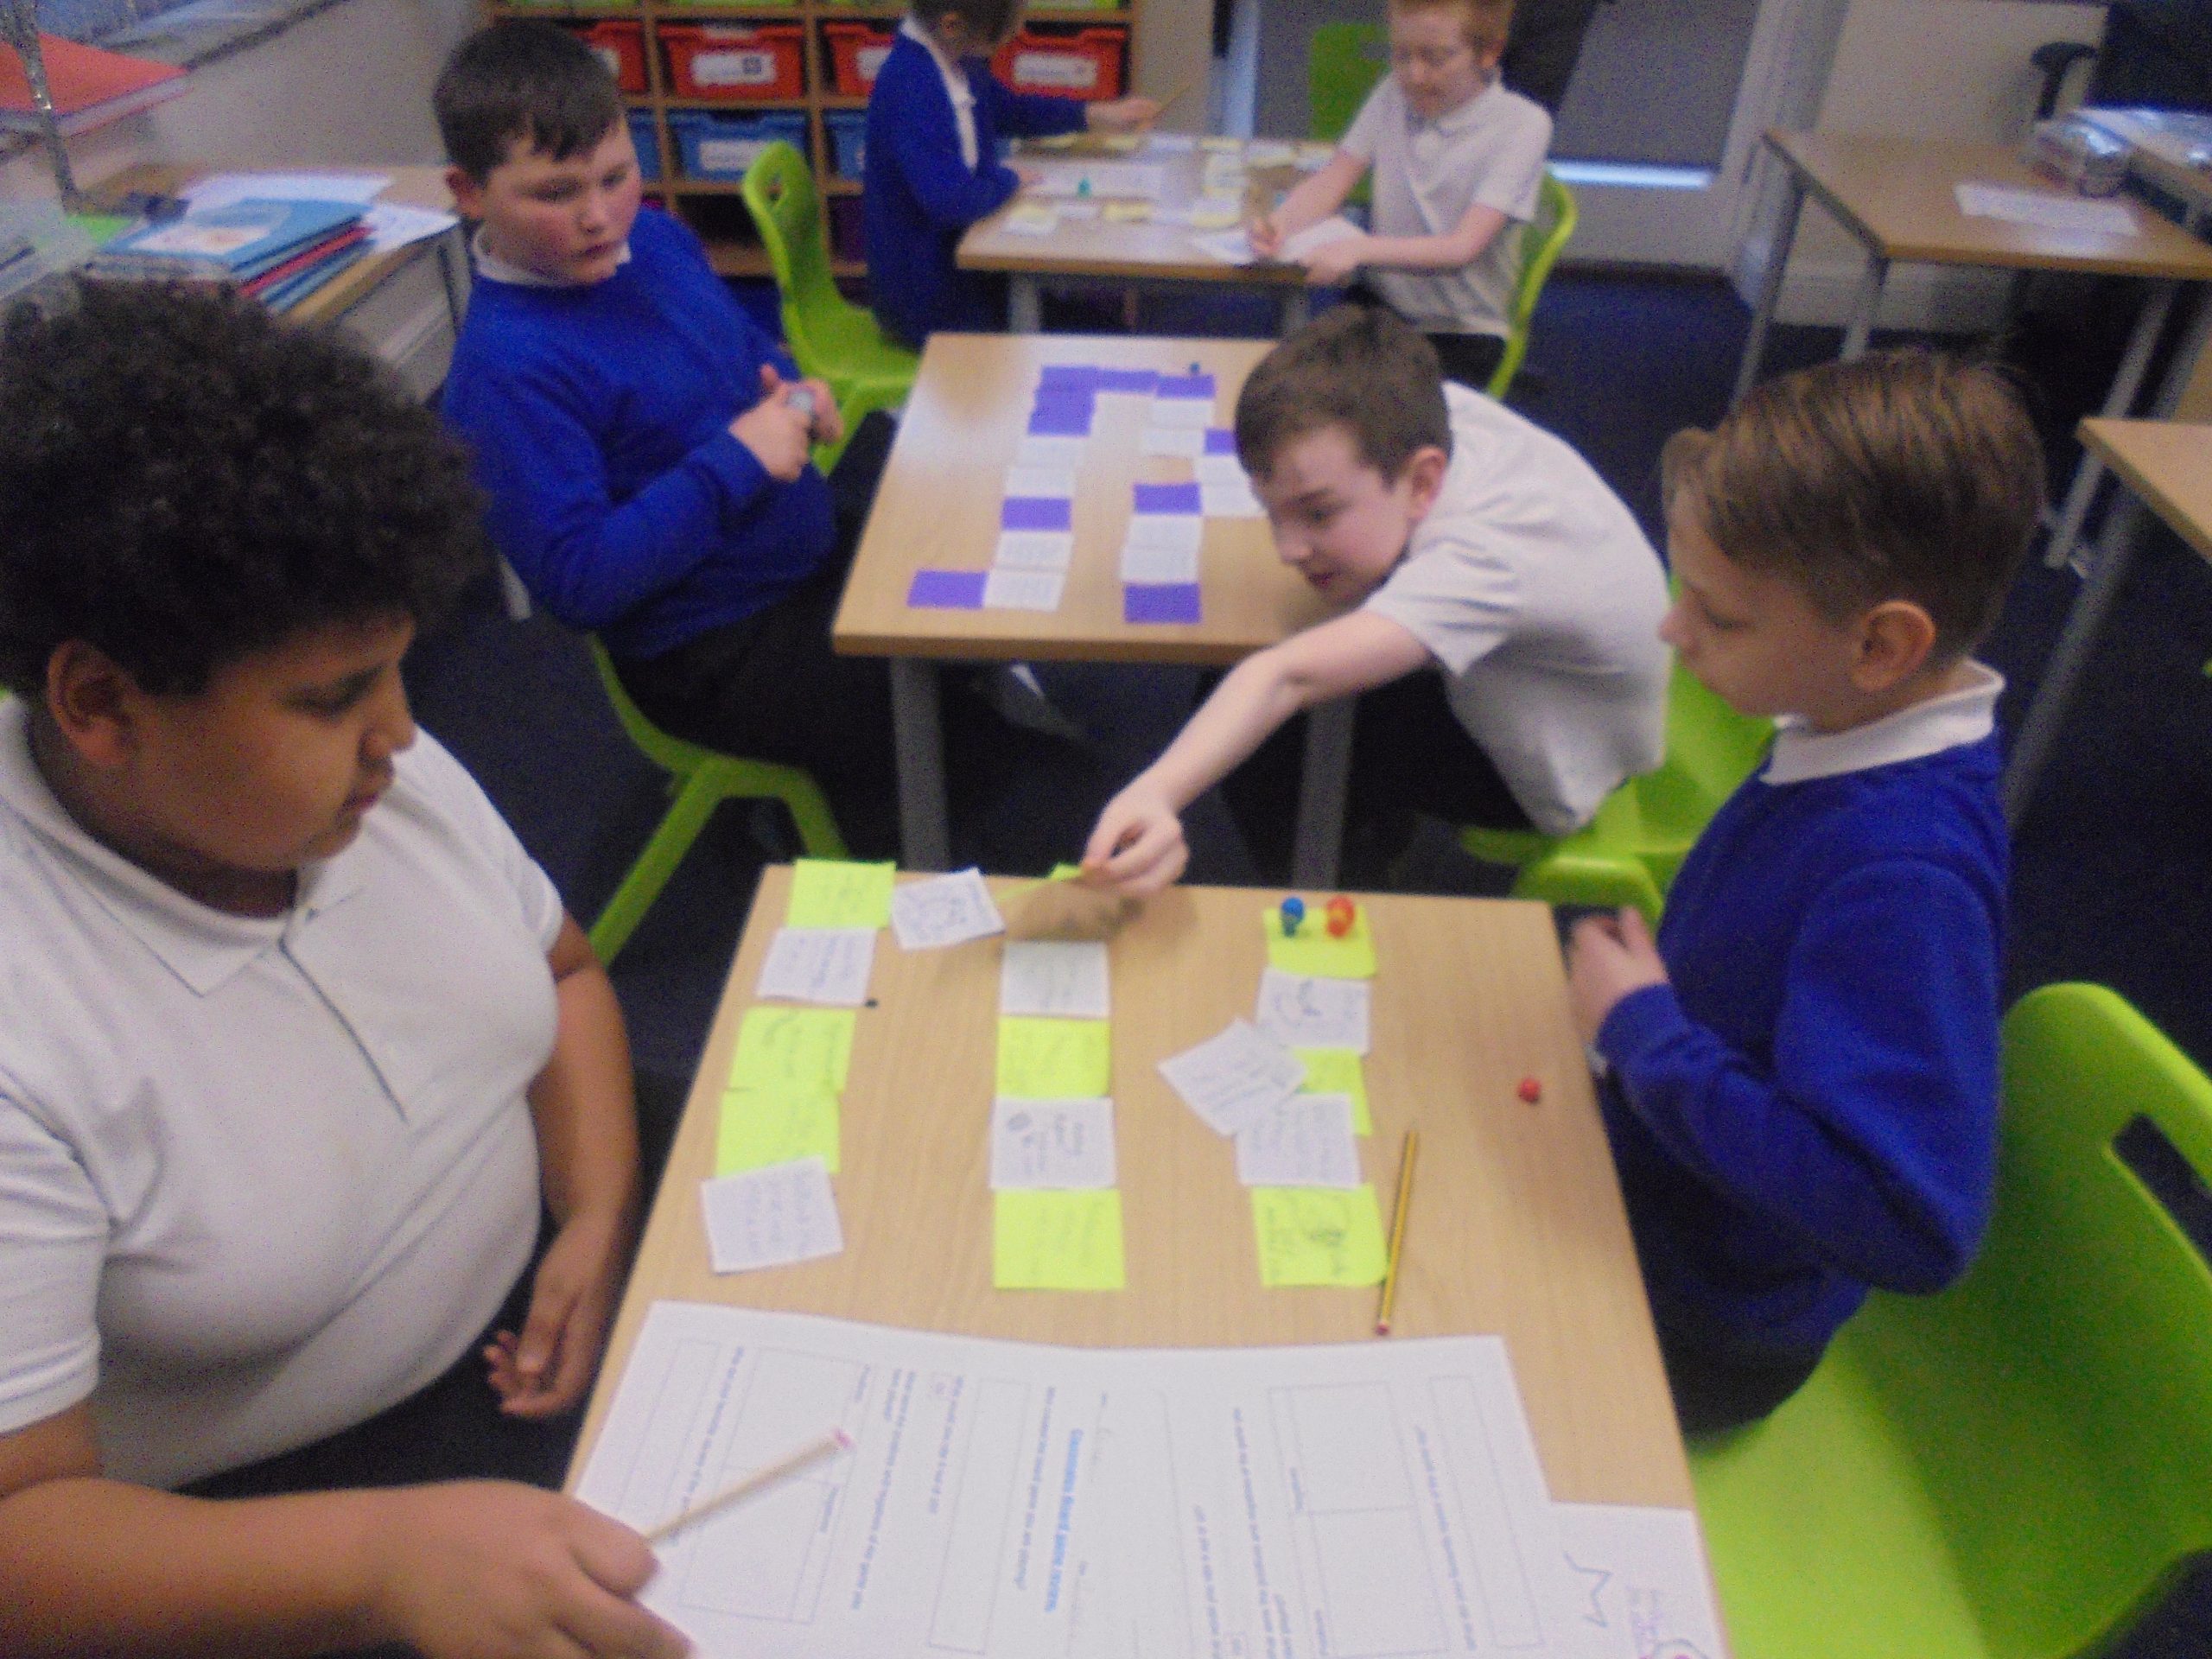 Pupils in a Calder class having fun with Literacy.